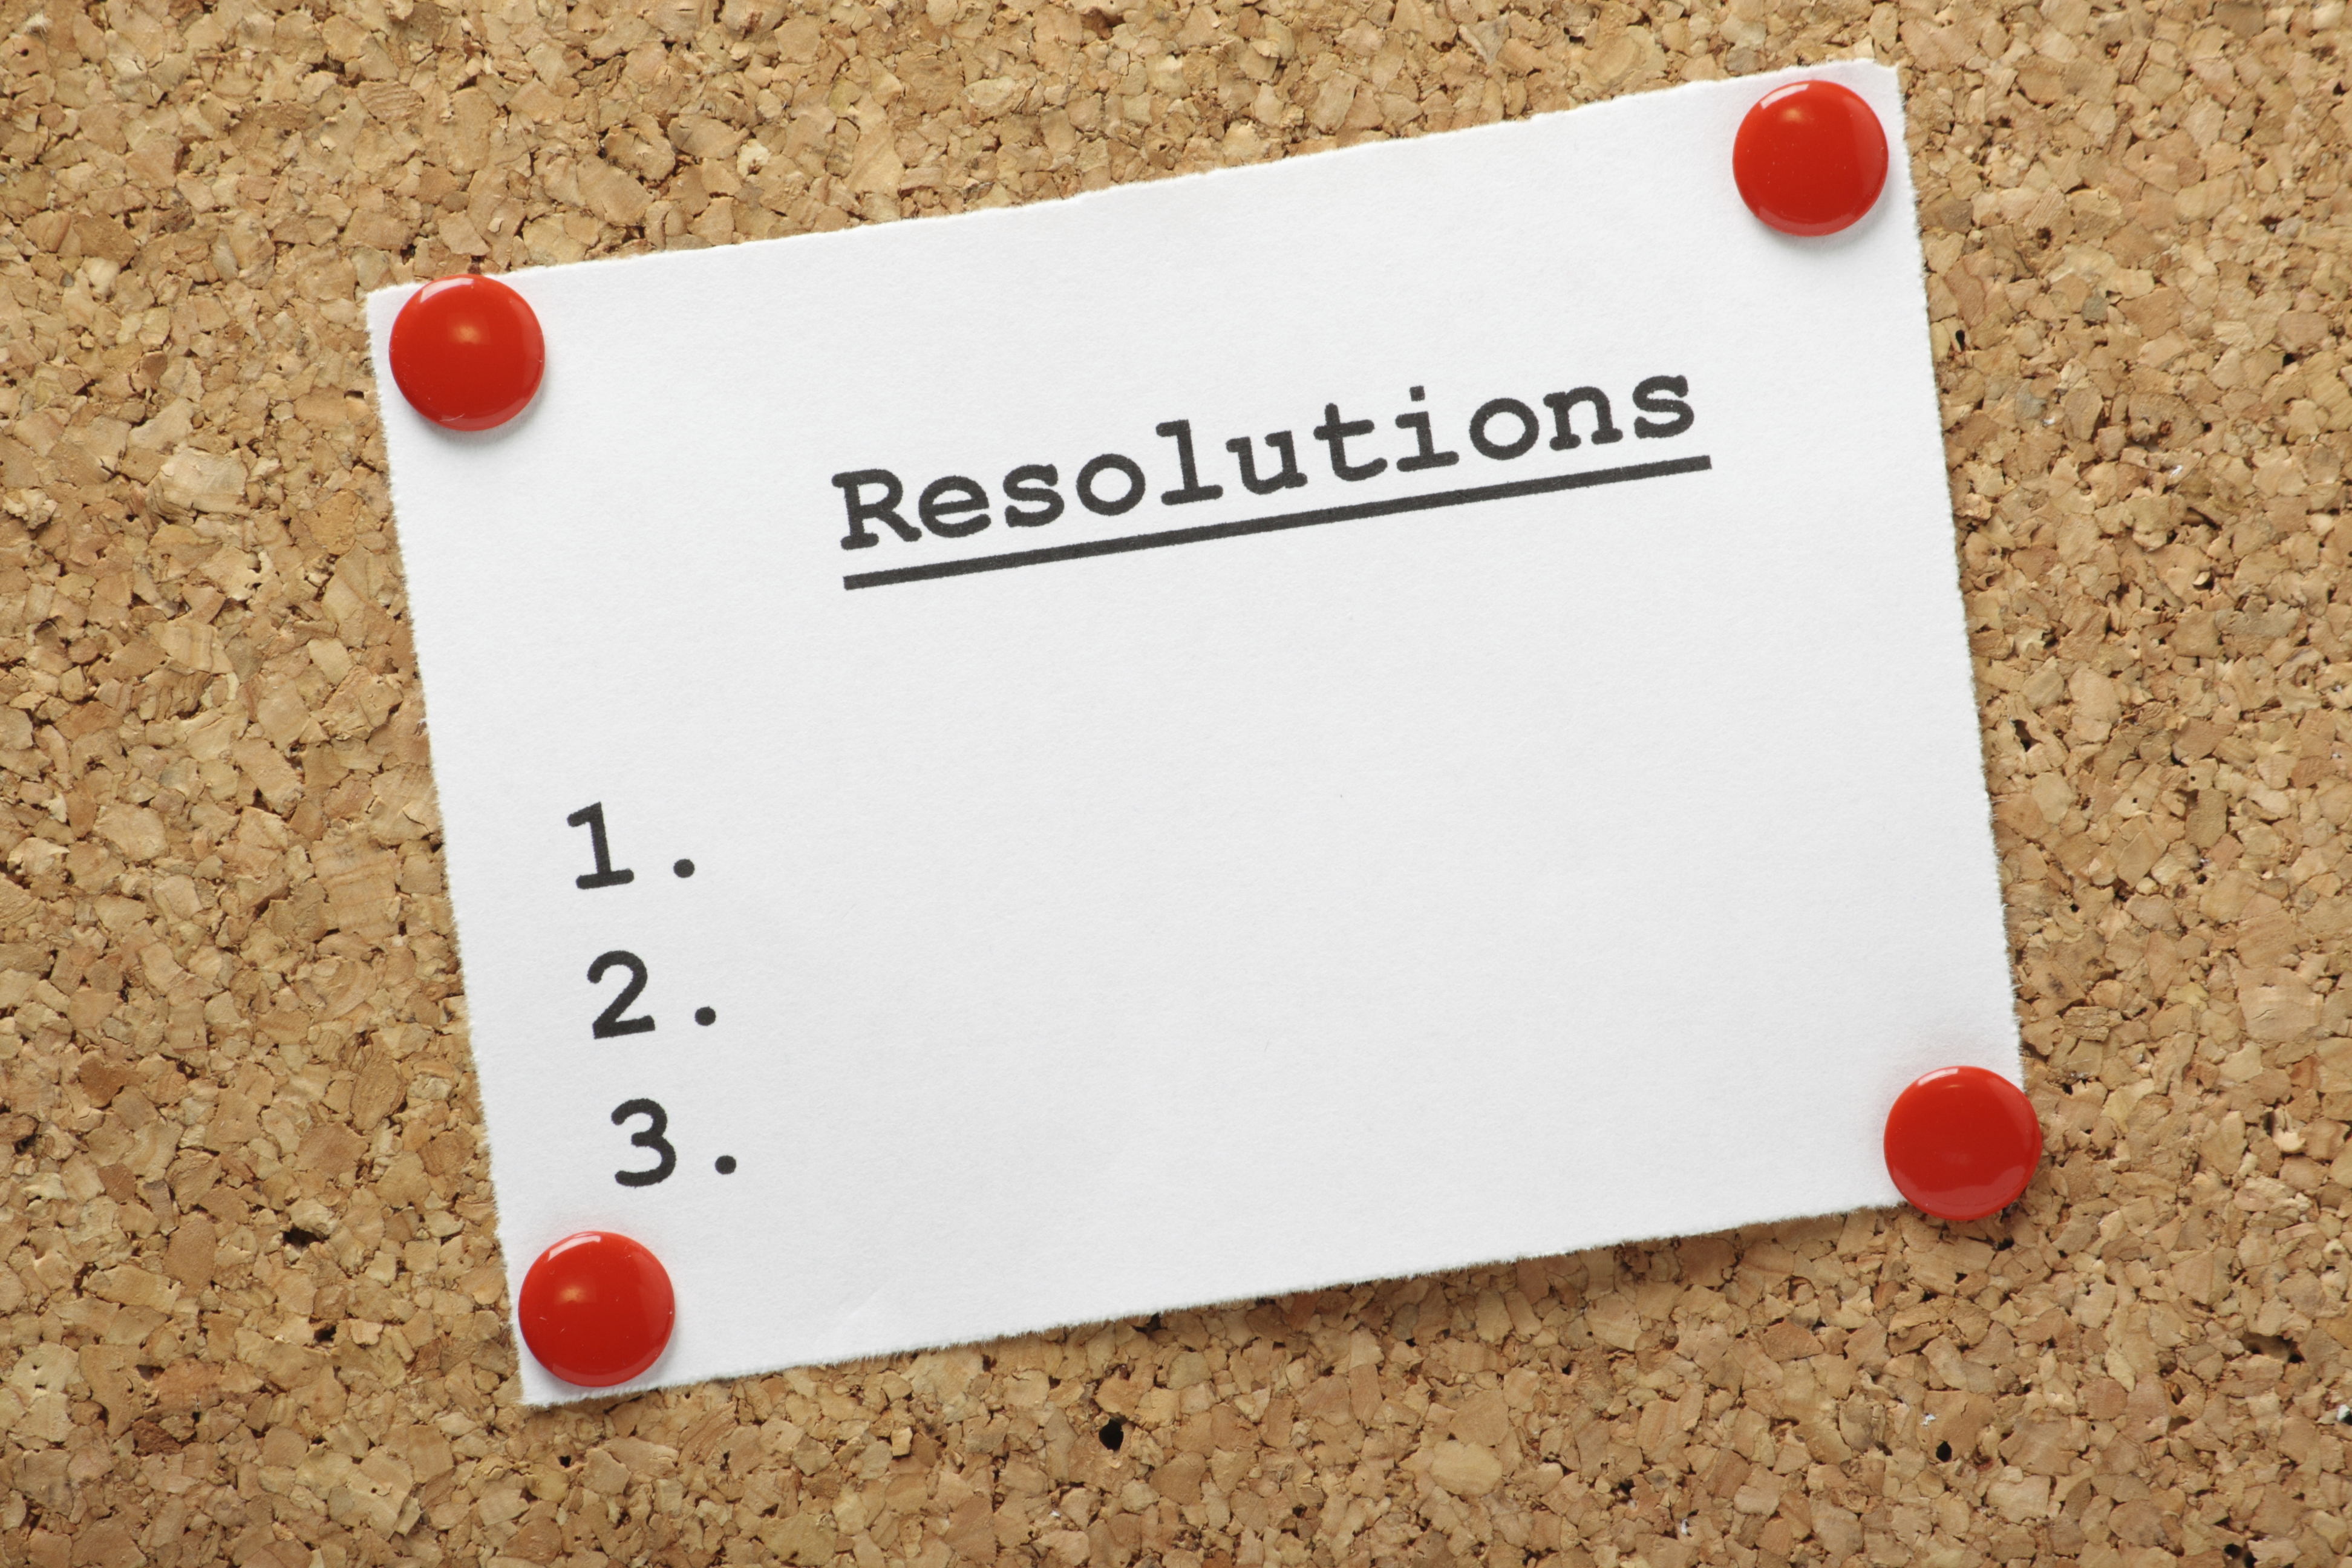 New years resolutions is. New year`s Resolutions. New year Resolutions картинки. Resolution list. New year Resolutions фон.